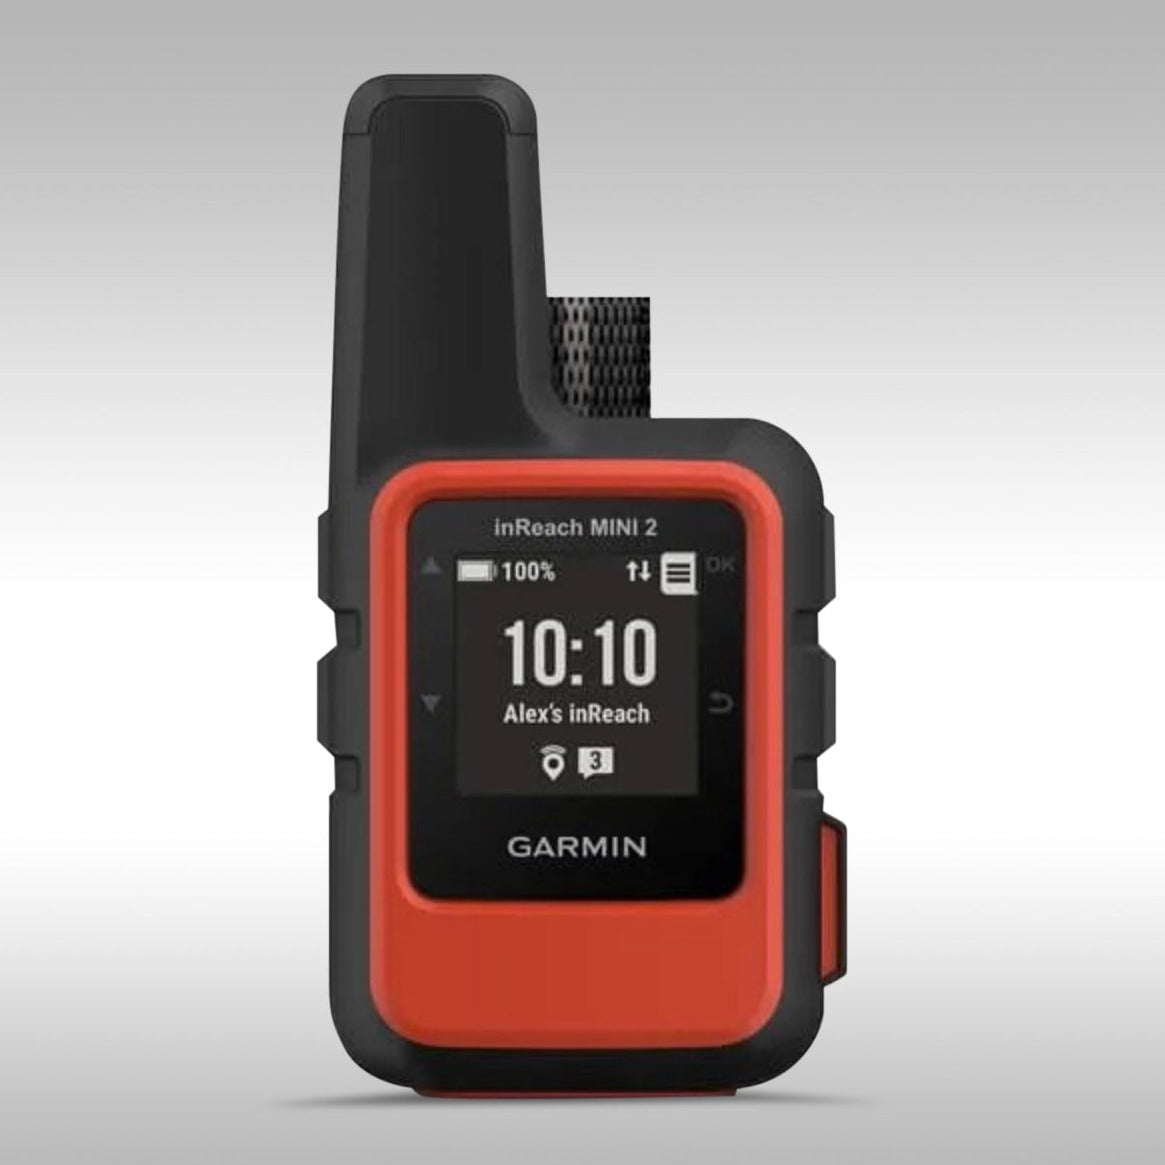 Garmin inReach Mini 2 personal GPS communicator and tracker with emergency SOS beacon function. Garmin GPS technology. GPS tracking for family and friends. Backcountry communications and emergency signal. 